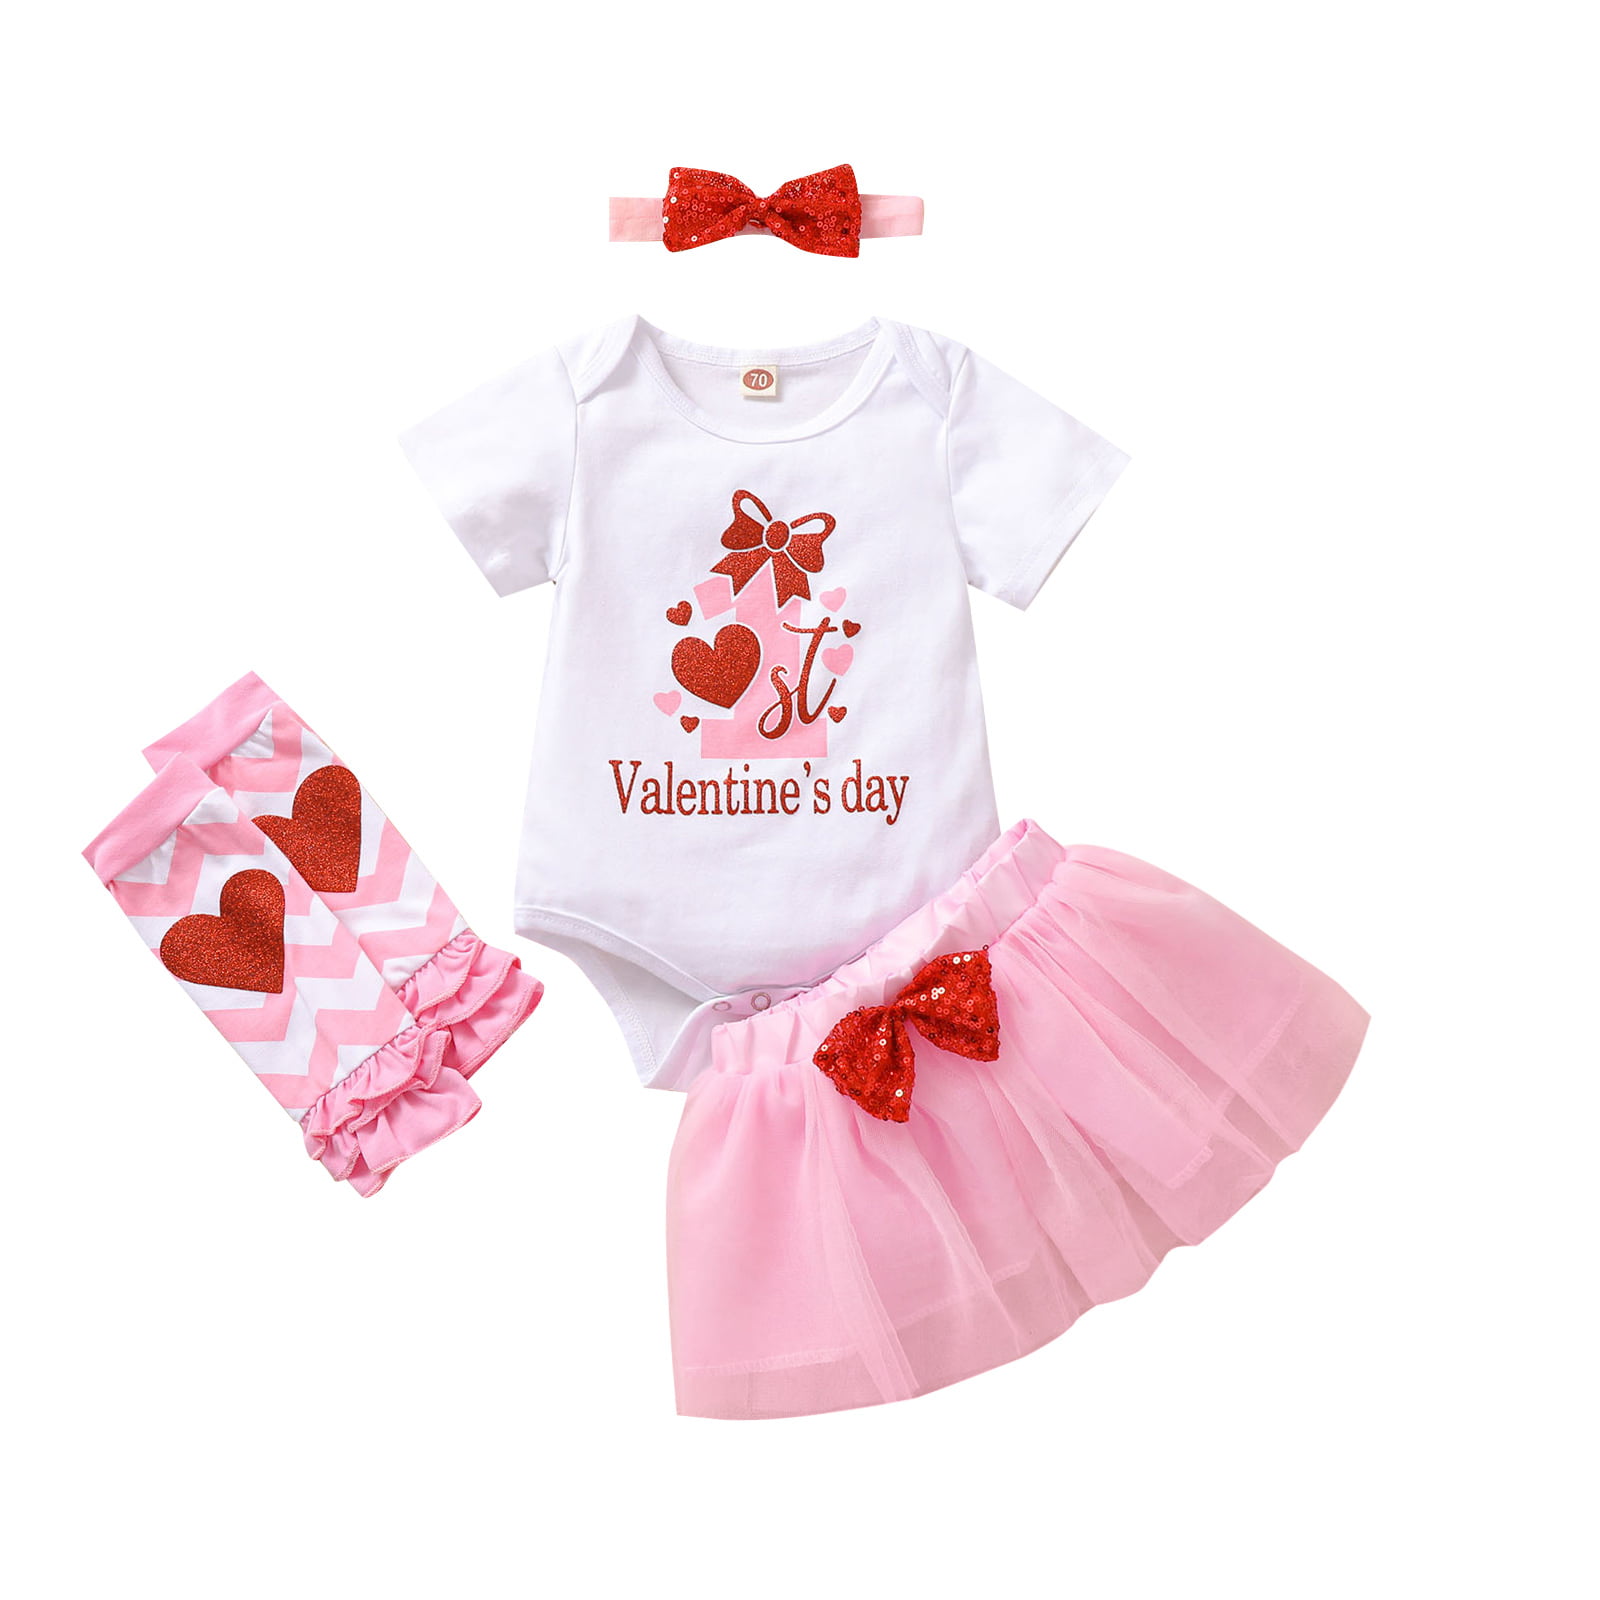 Details about   Baby Girl 1st Birthday Party Dress Romper Tops Tutu Skirts Headband Outfits Sets 